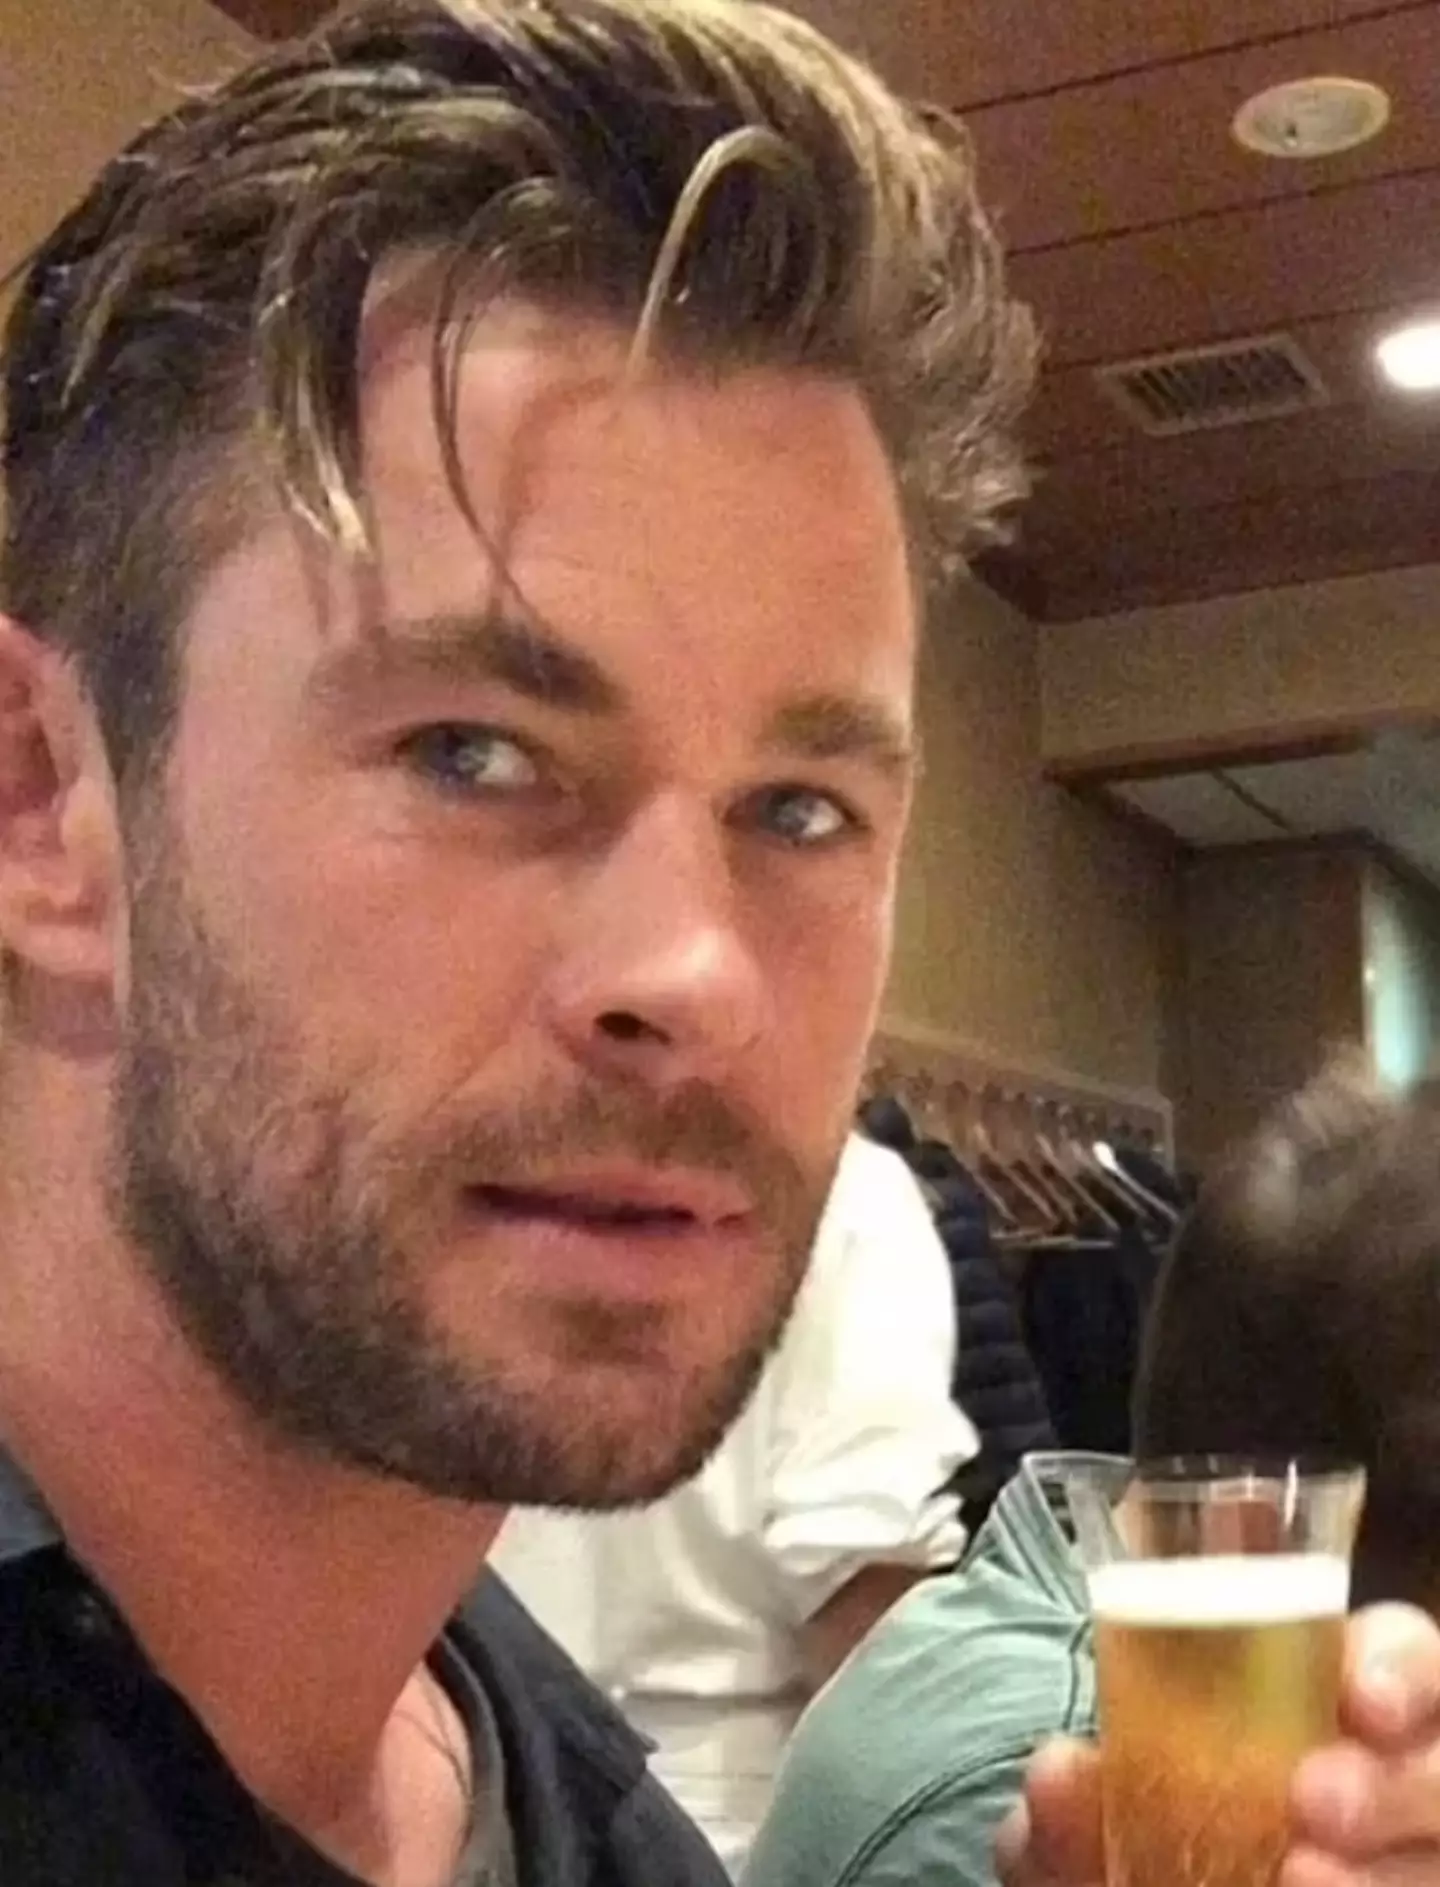 Chris Hemsworth clearly made the mistake of indulging too much in Ibiza.